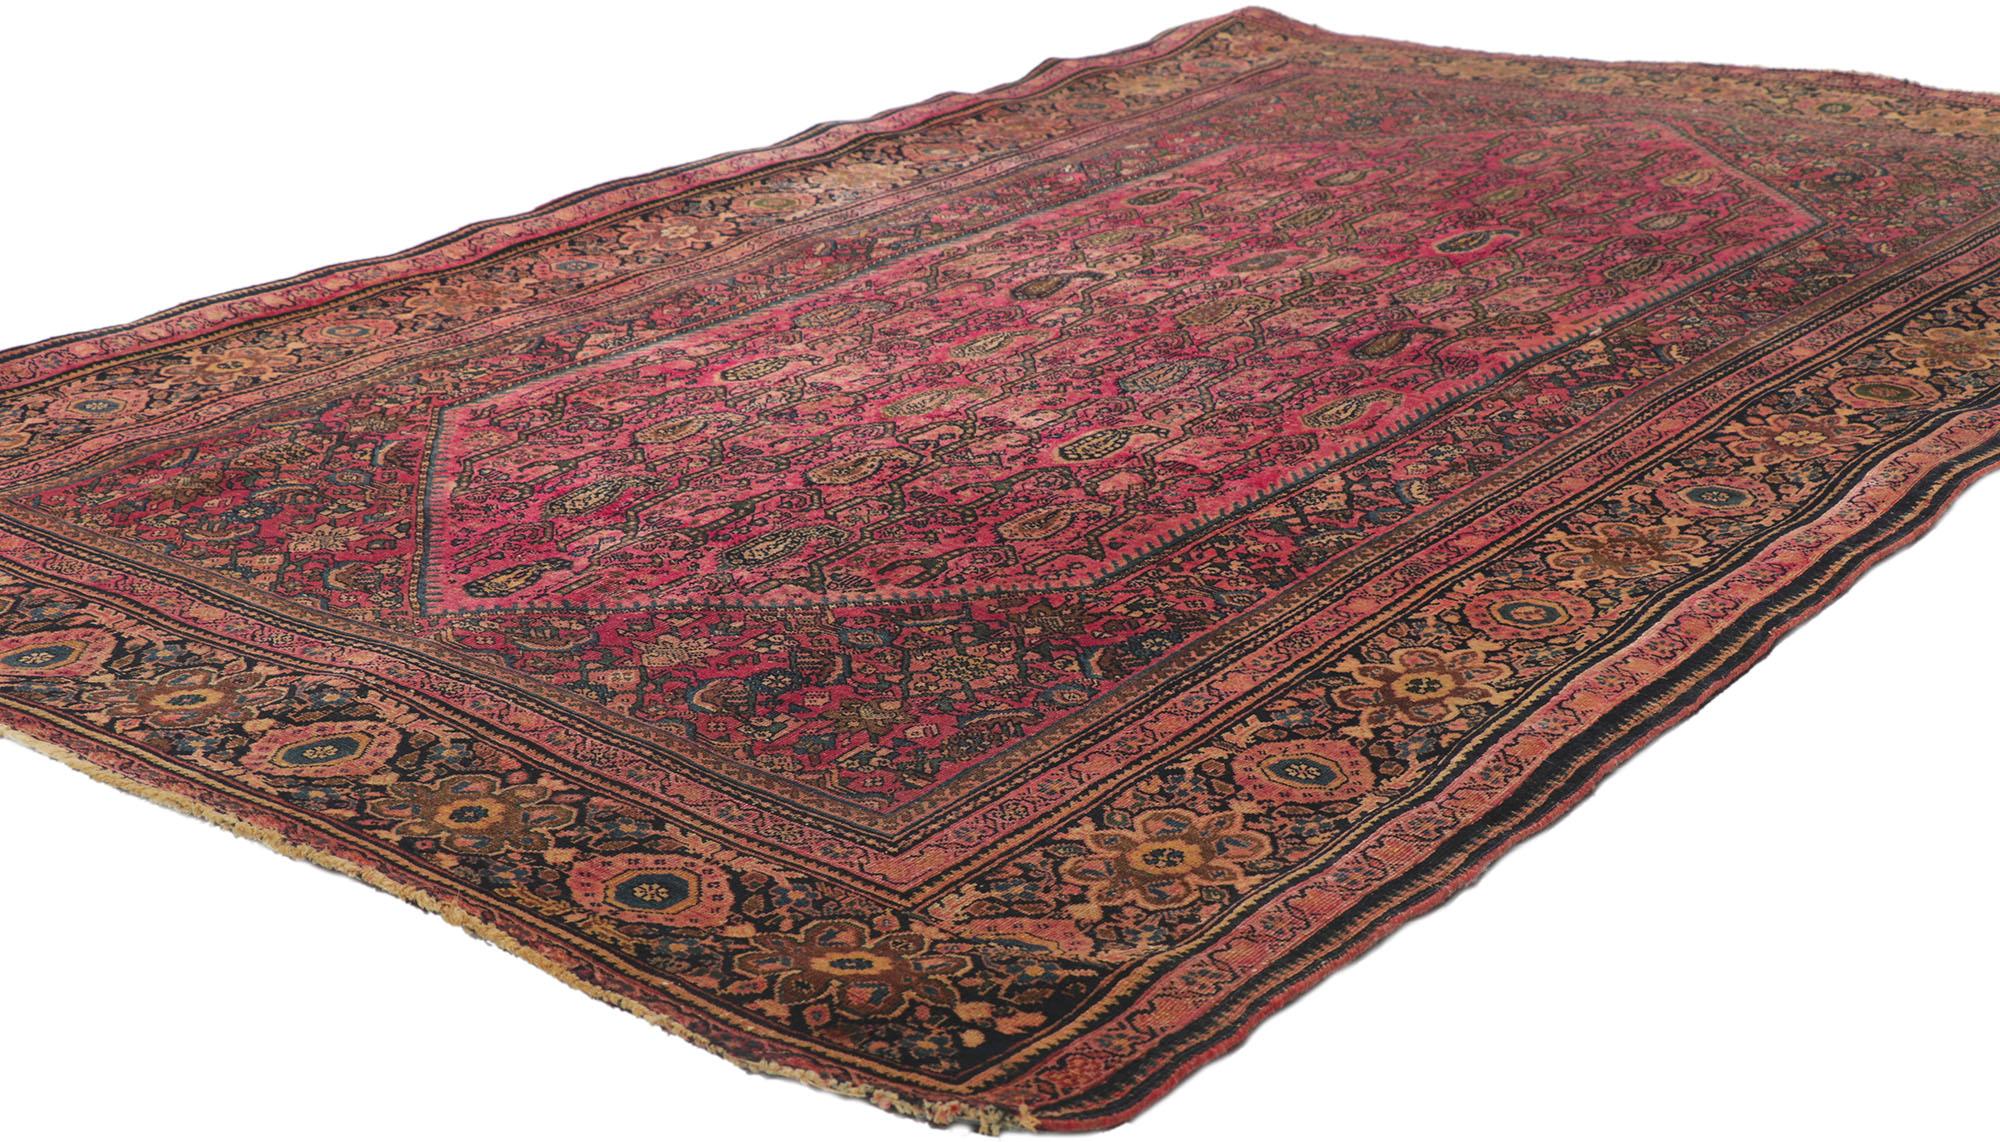 74293 Antique Persian Farahan rug 04'02 X 06'04. With its effortless beauty and classic design, this hand-knotted wool is poised to impress. The abrashed red field is covered in an all-over angular boteh lattice pattern. Full of tiny details and